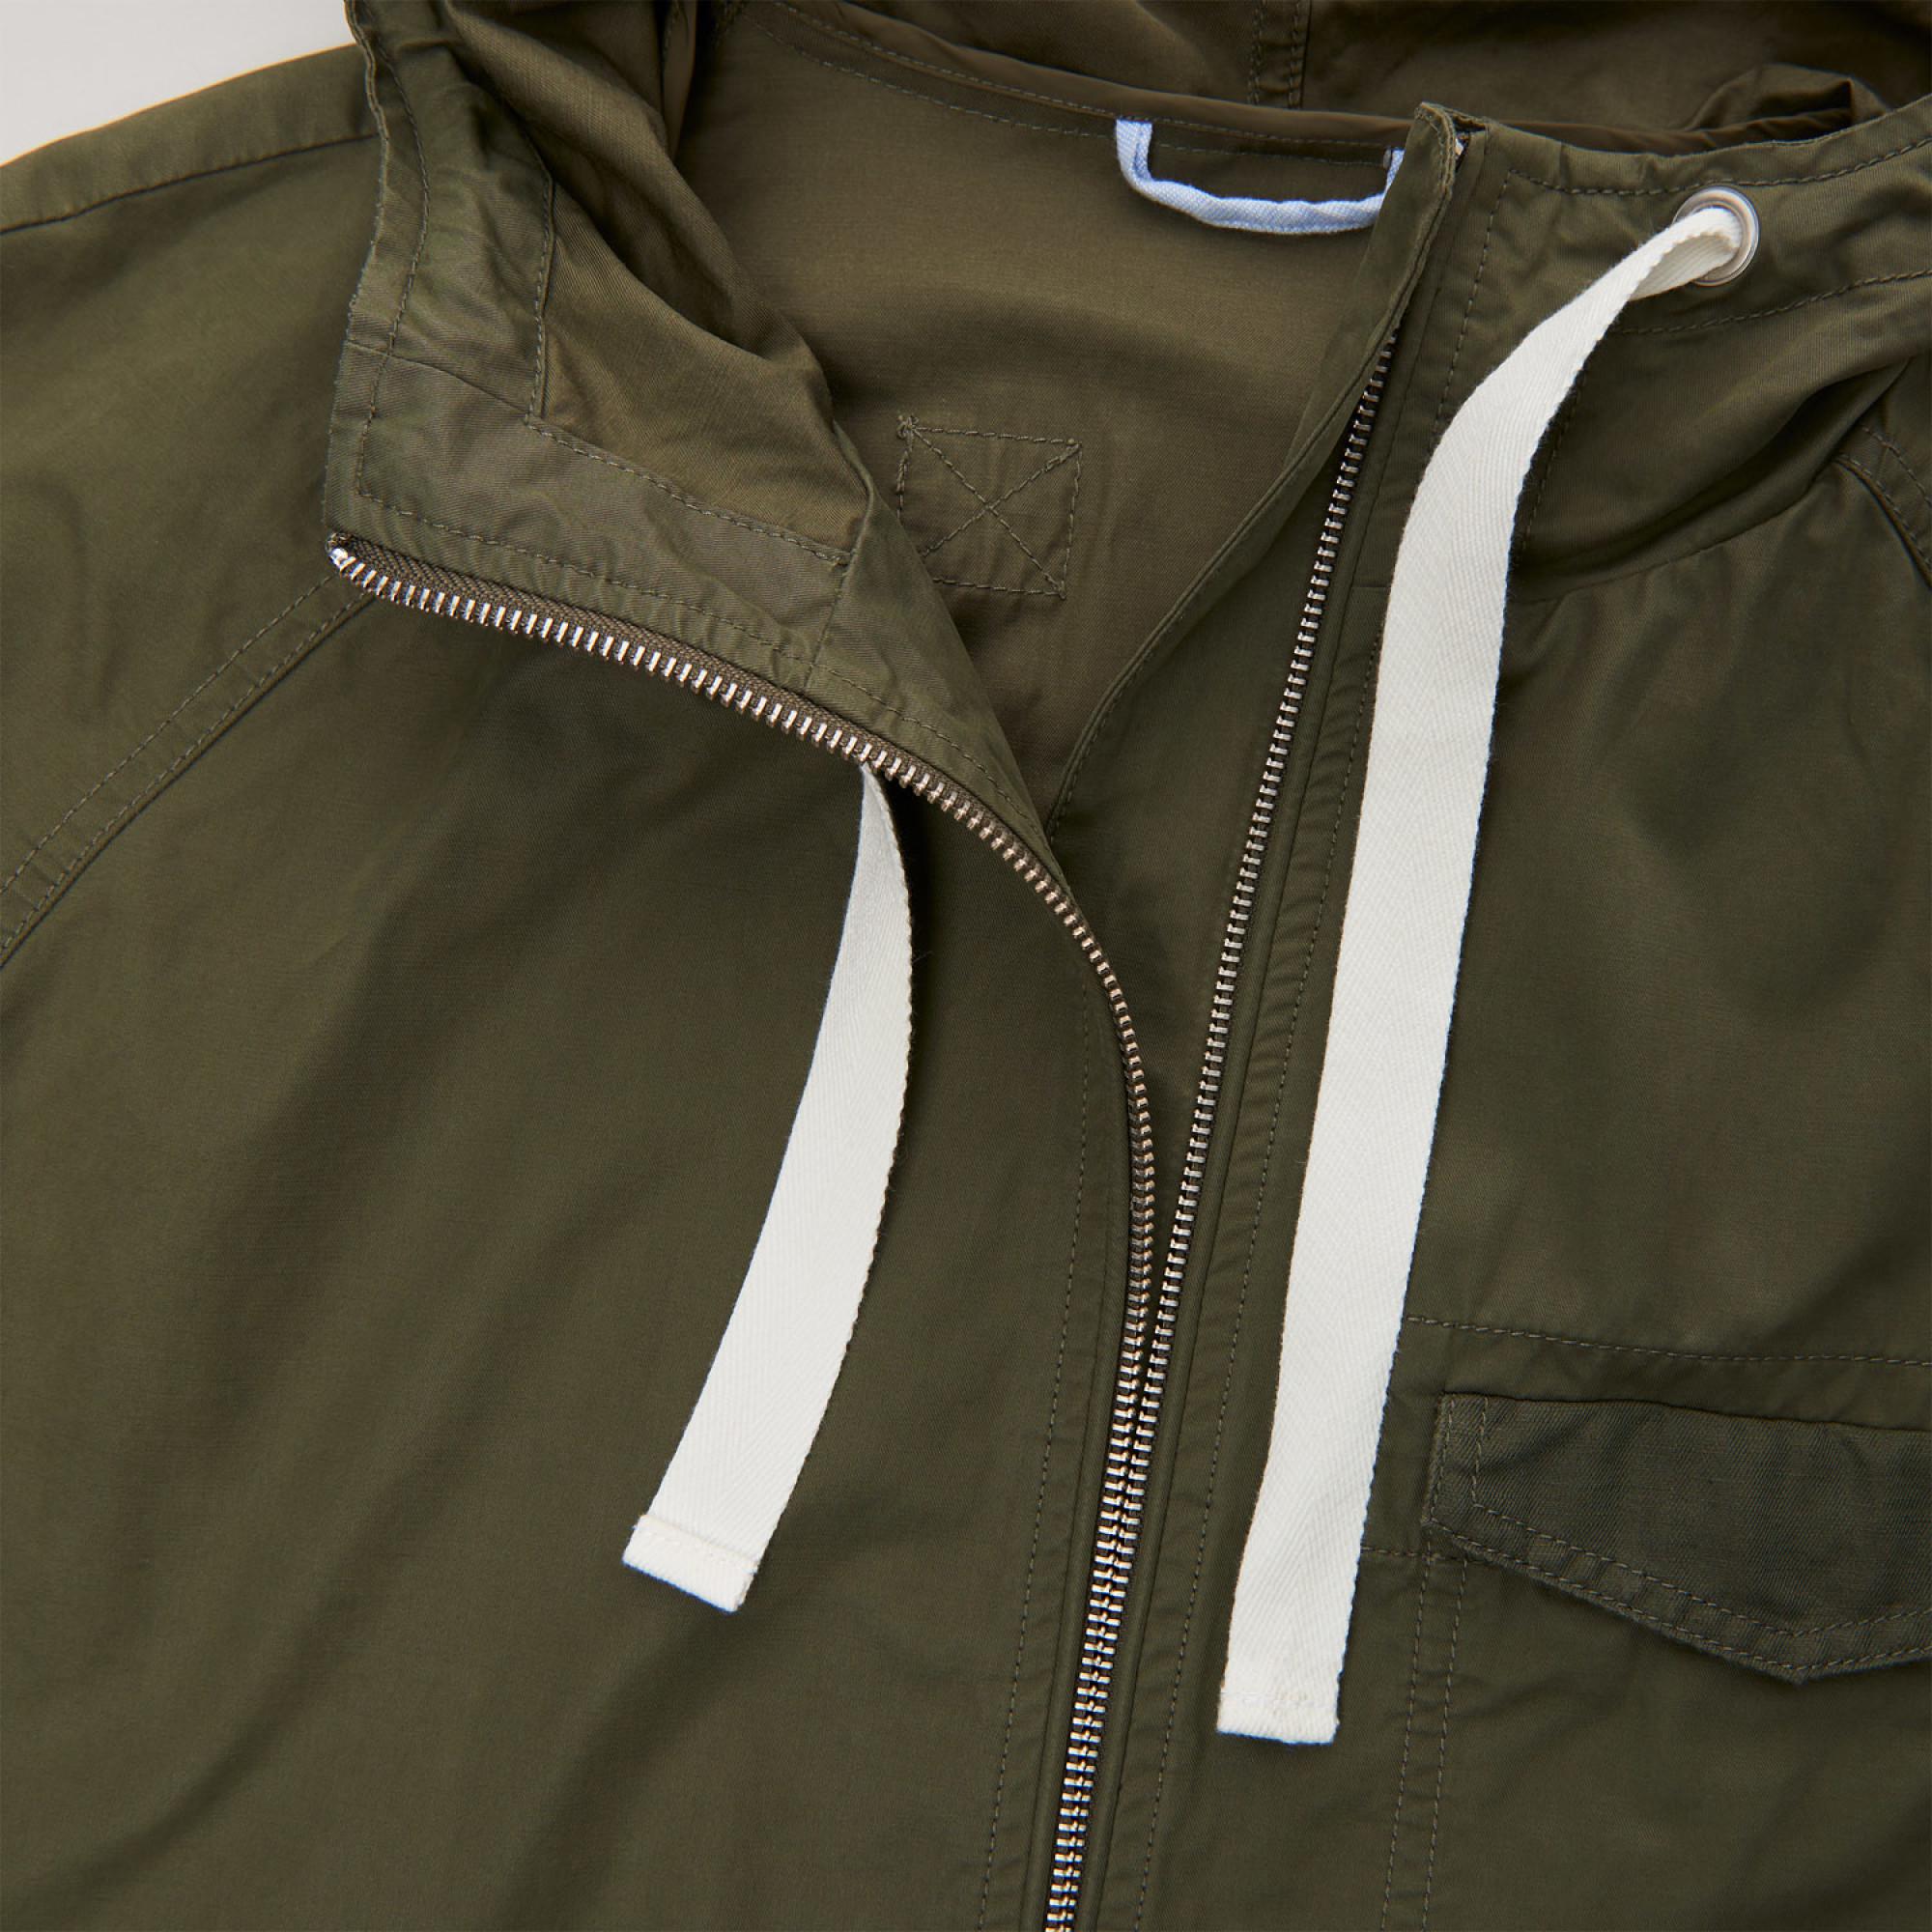 GANT The Rough Weather Jacket in Green for Men - Lyst